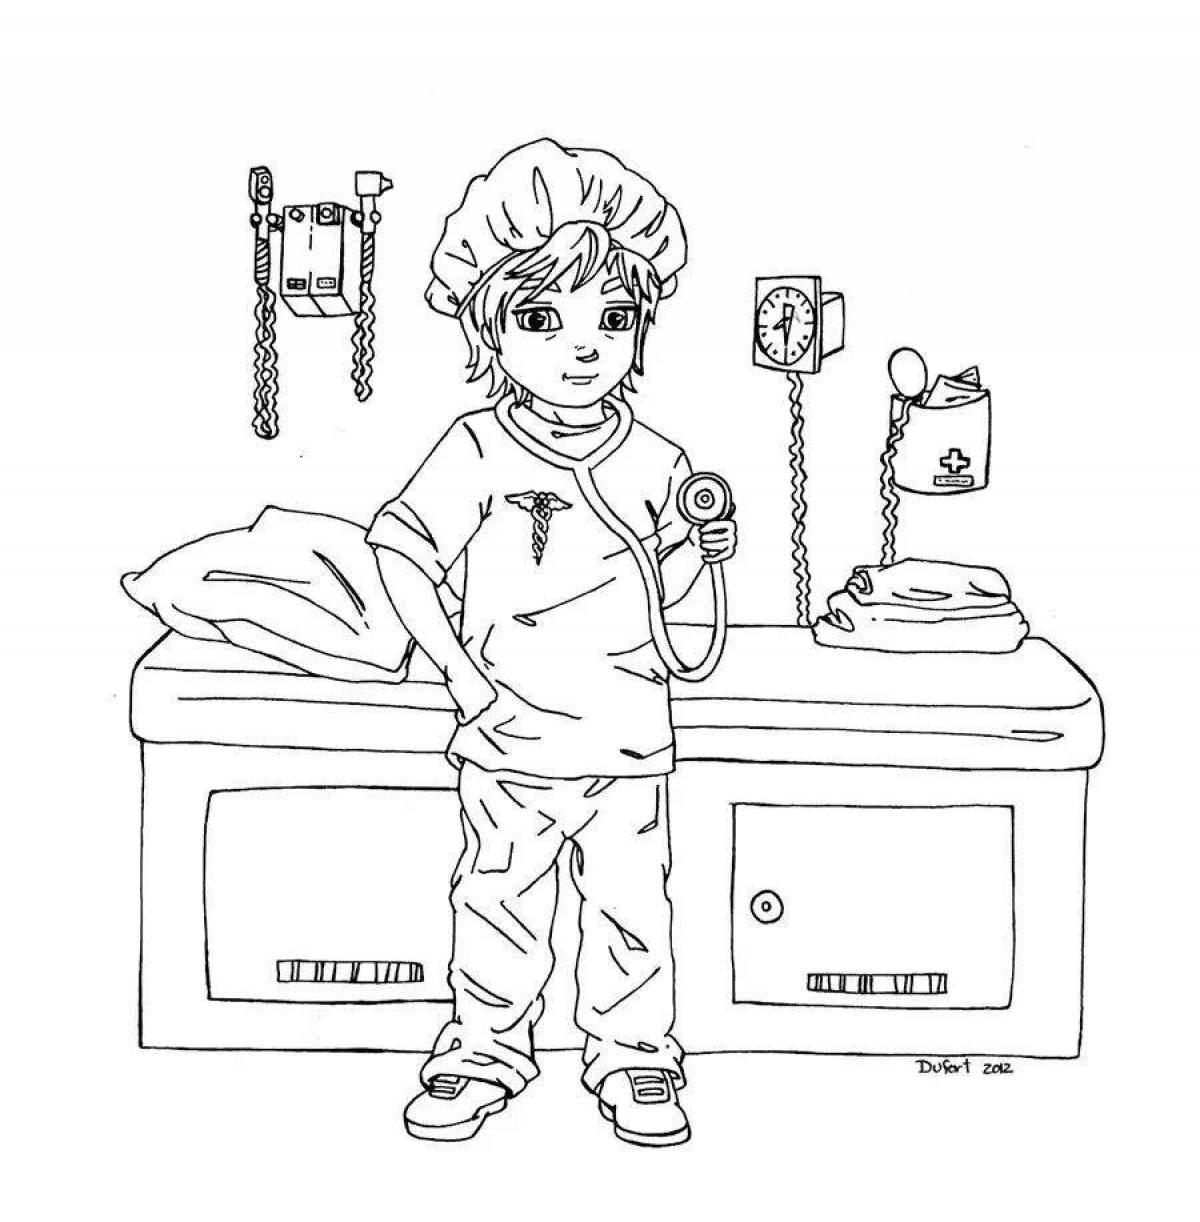 Occupational safety through the eyes of children #6